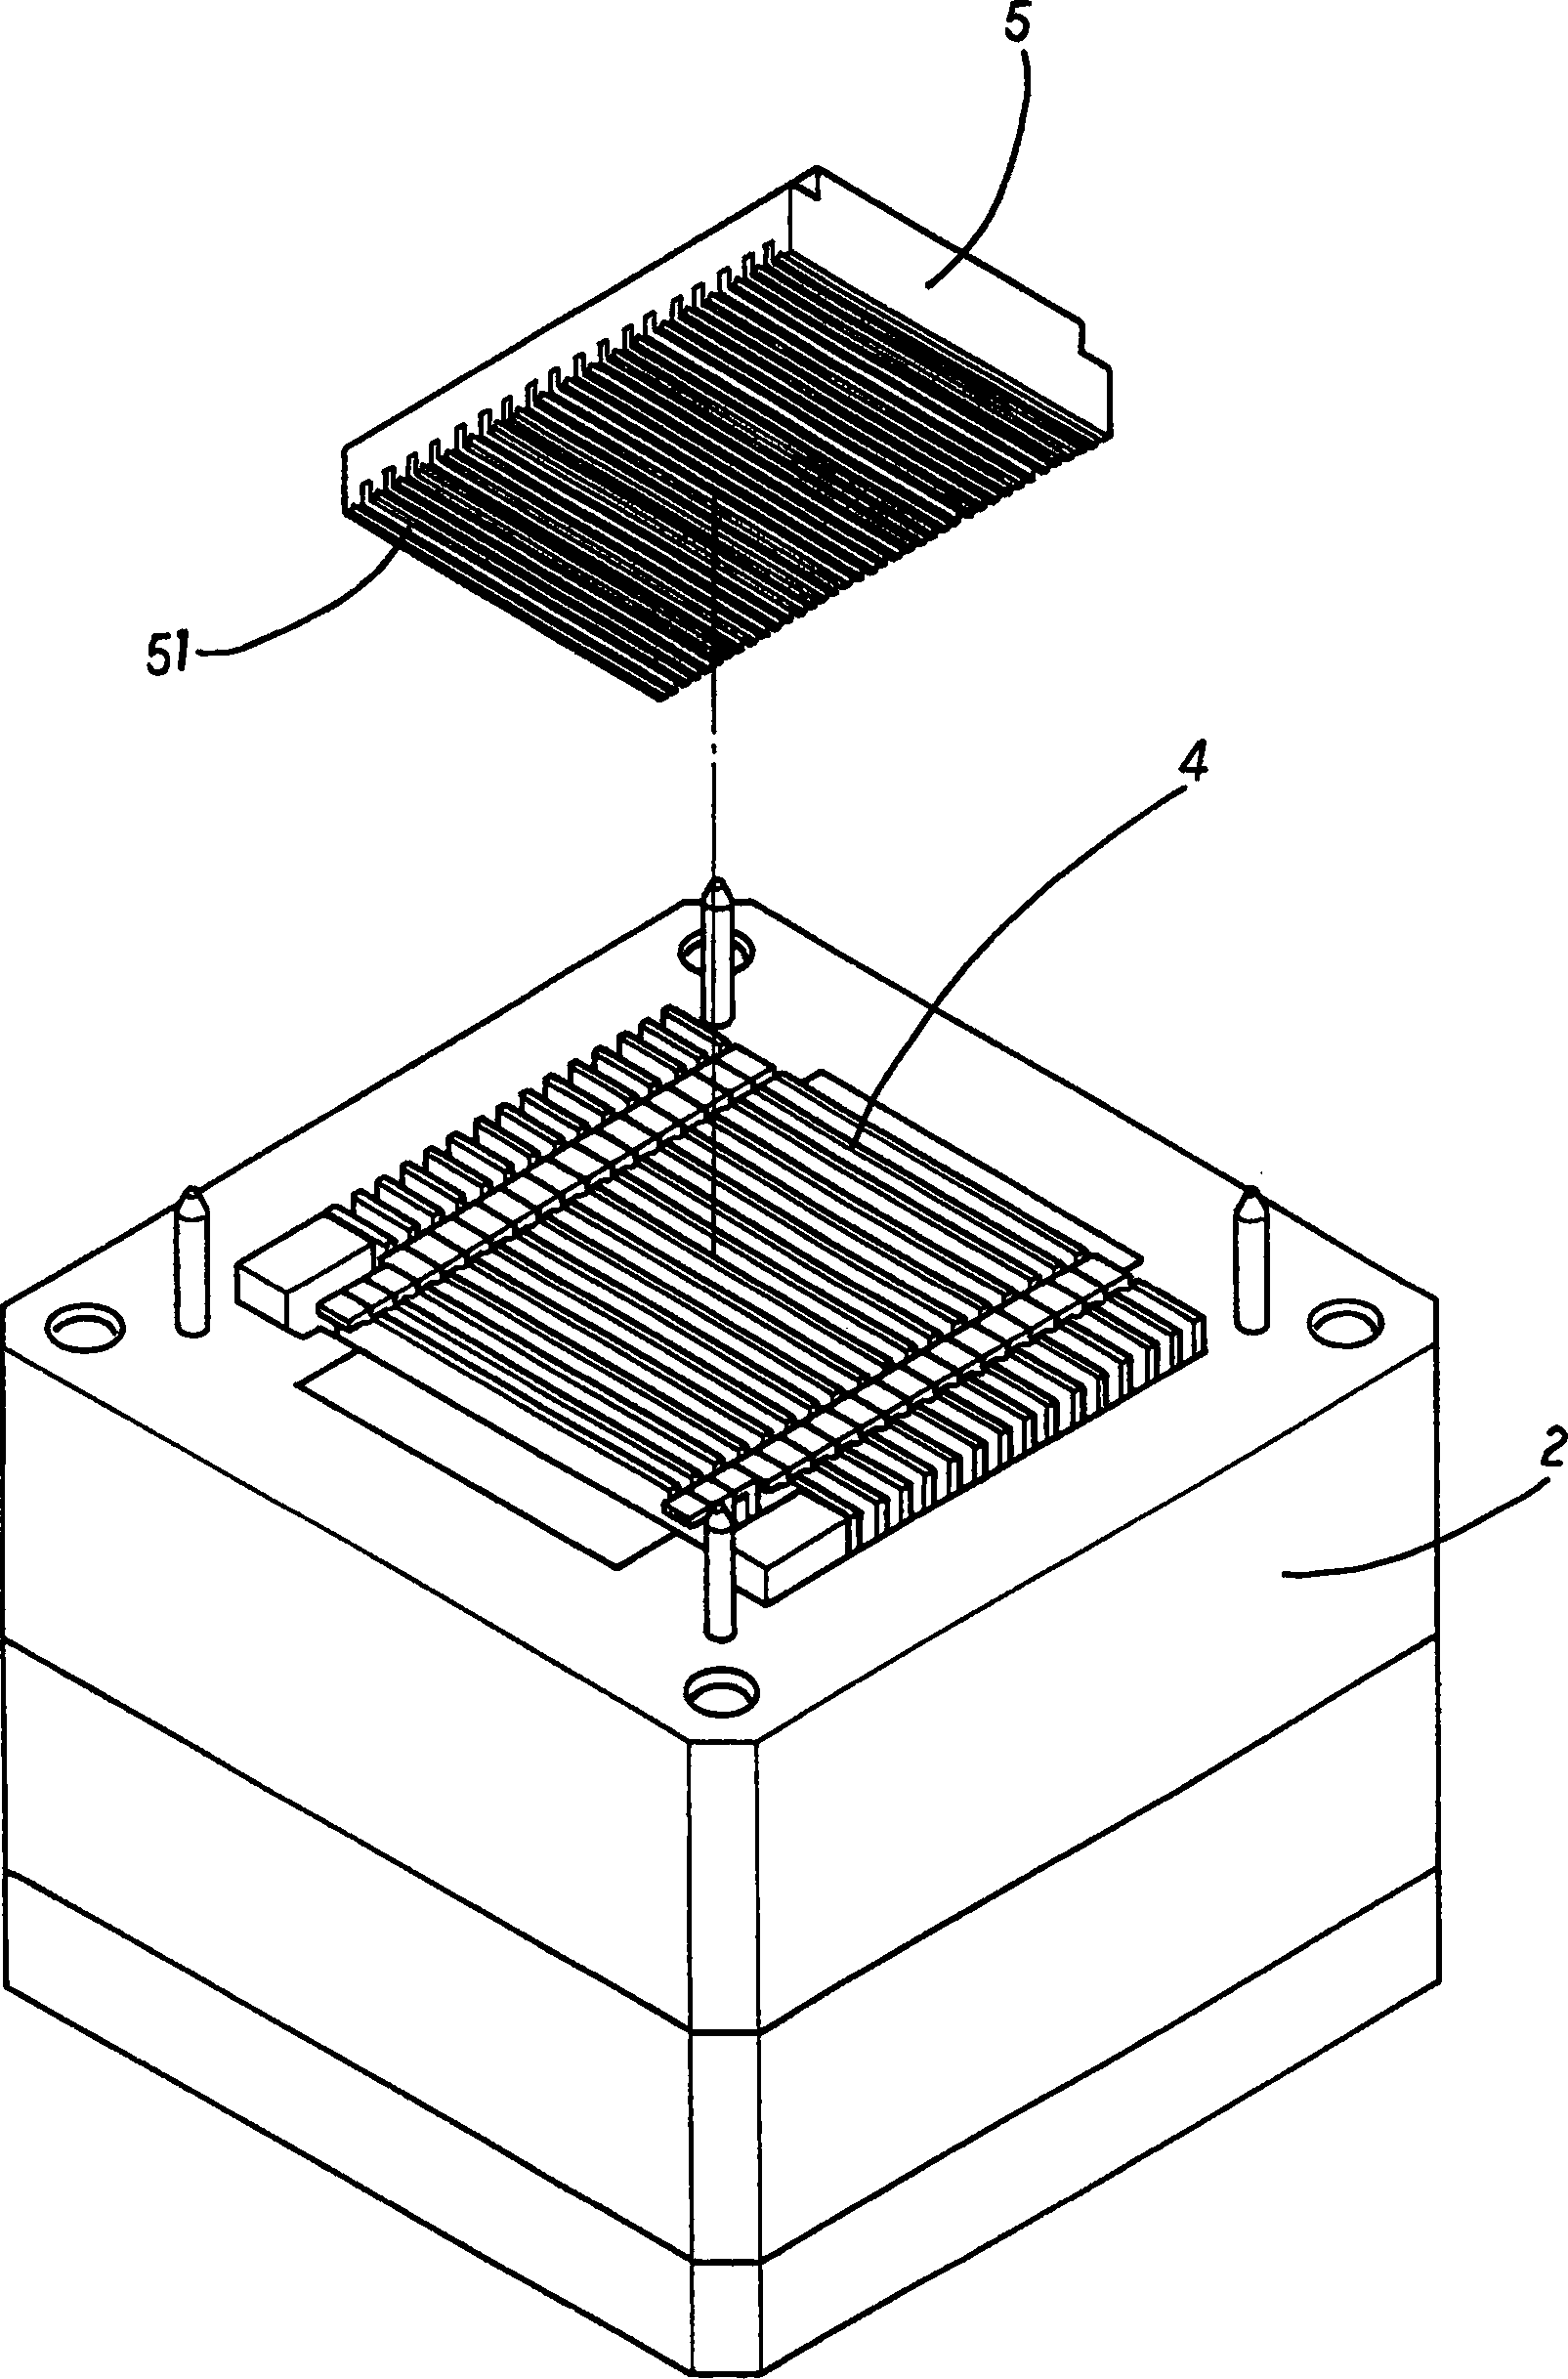 Technique for riveting base plate of radiator and fins